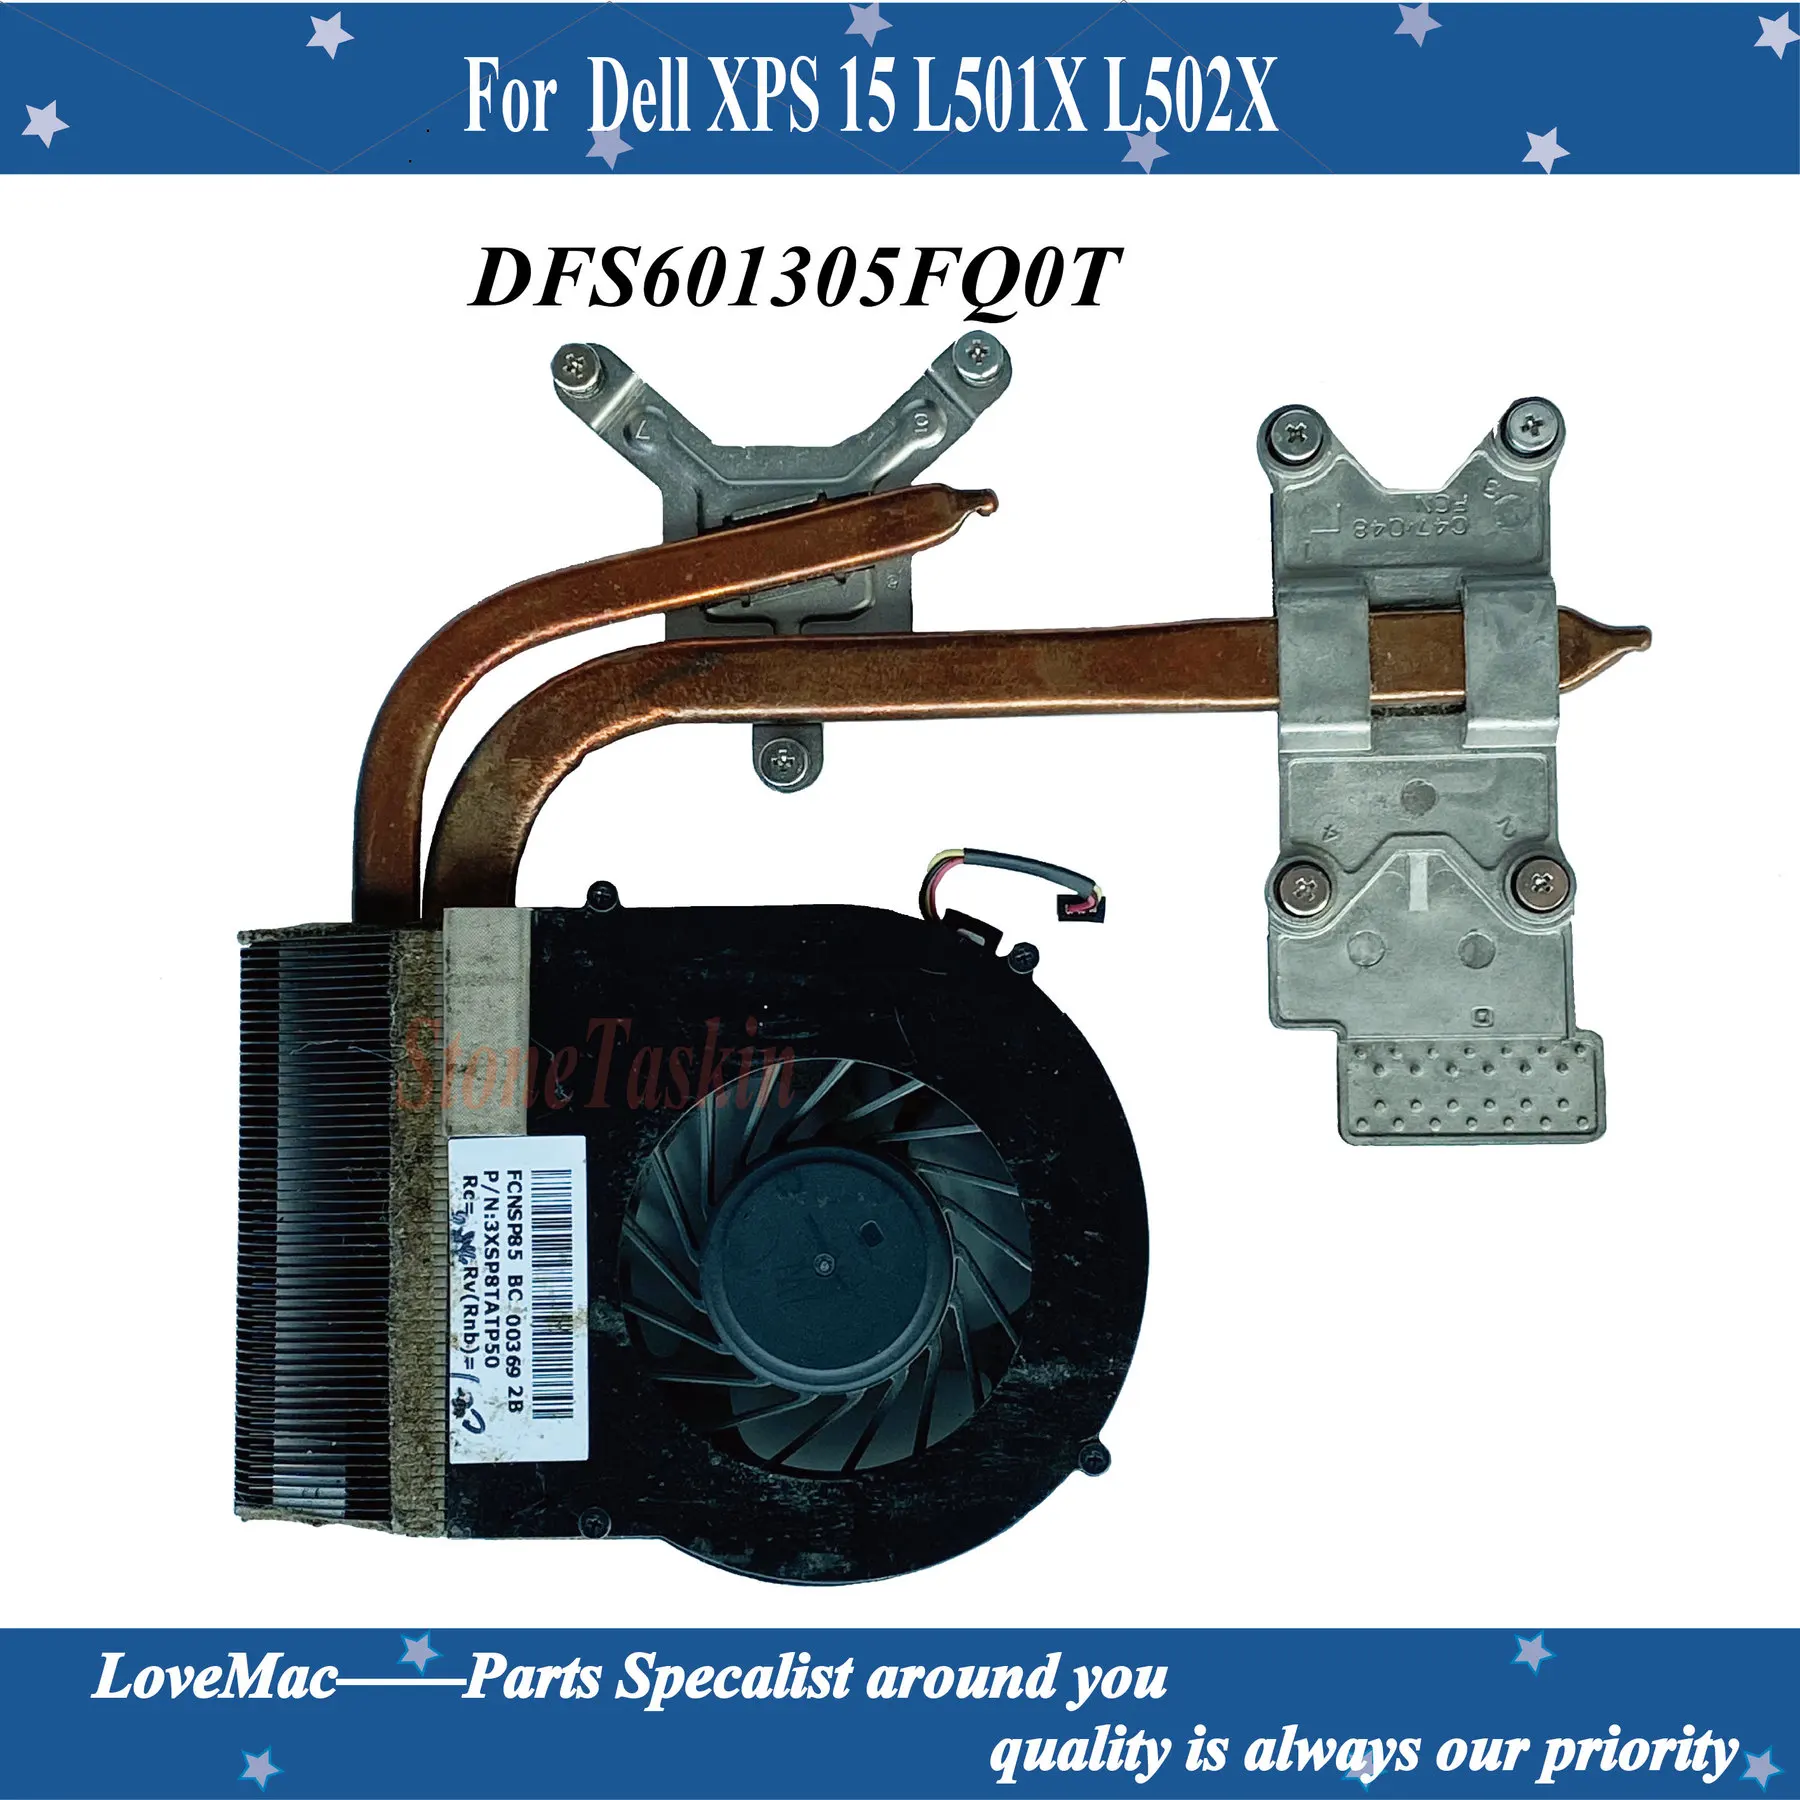 

New CPU fan cooler for Dell XPS 15 L501X L502X cpu cooling fan DFS601305FQ0T F98S KSB0705HA-A-AC94 DP/N 0W3M3P W3M3P tested